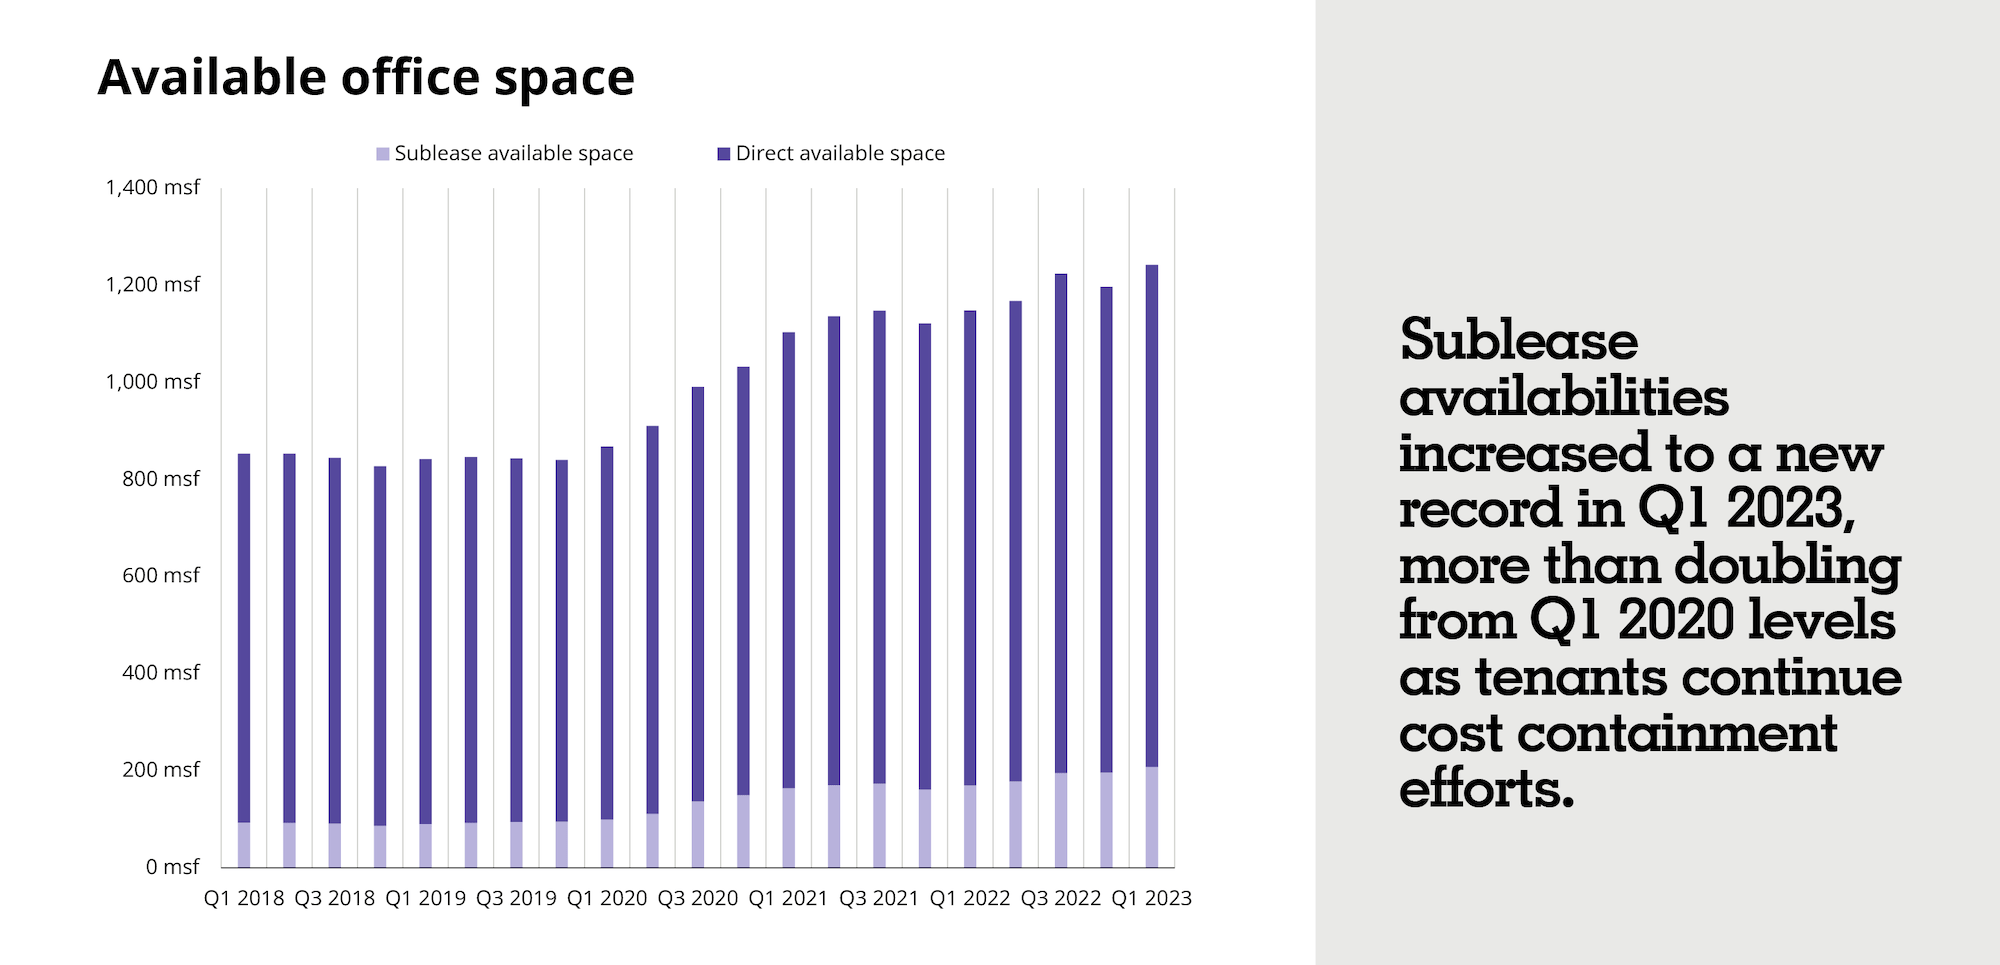 Comparison of Direct and Sublease Availabilities in US office building Q1 2018 to Q1 2023